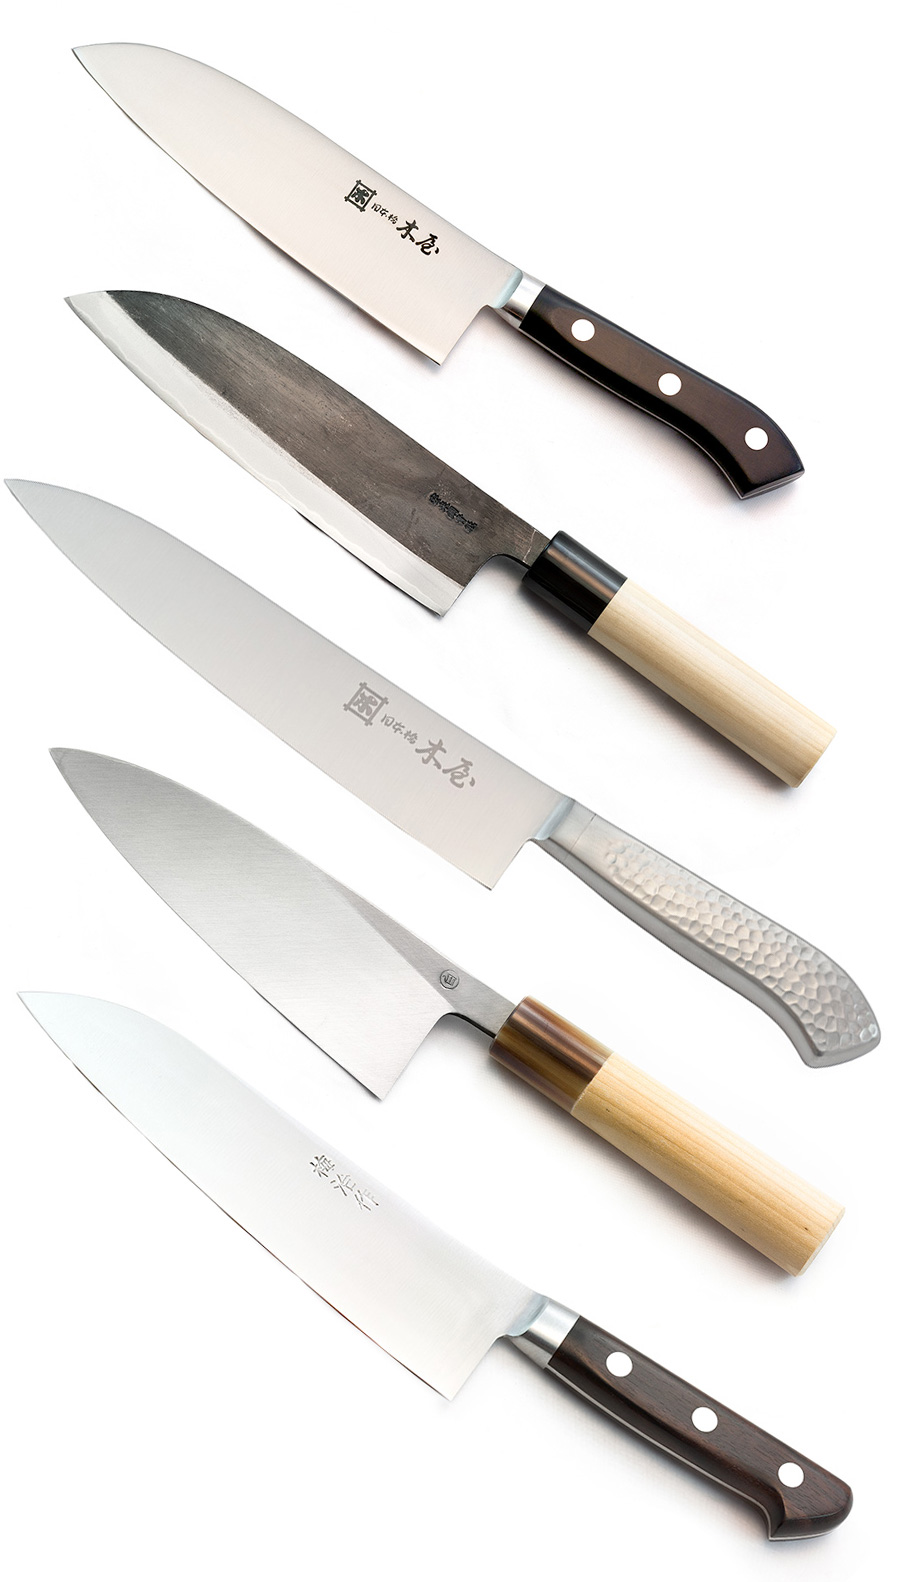 Buying Kitchen Knives: How to choose the best kitchen knife for you